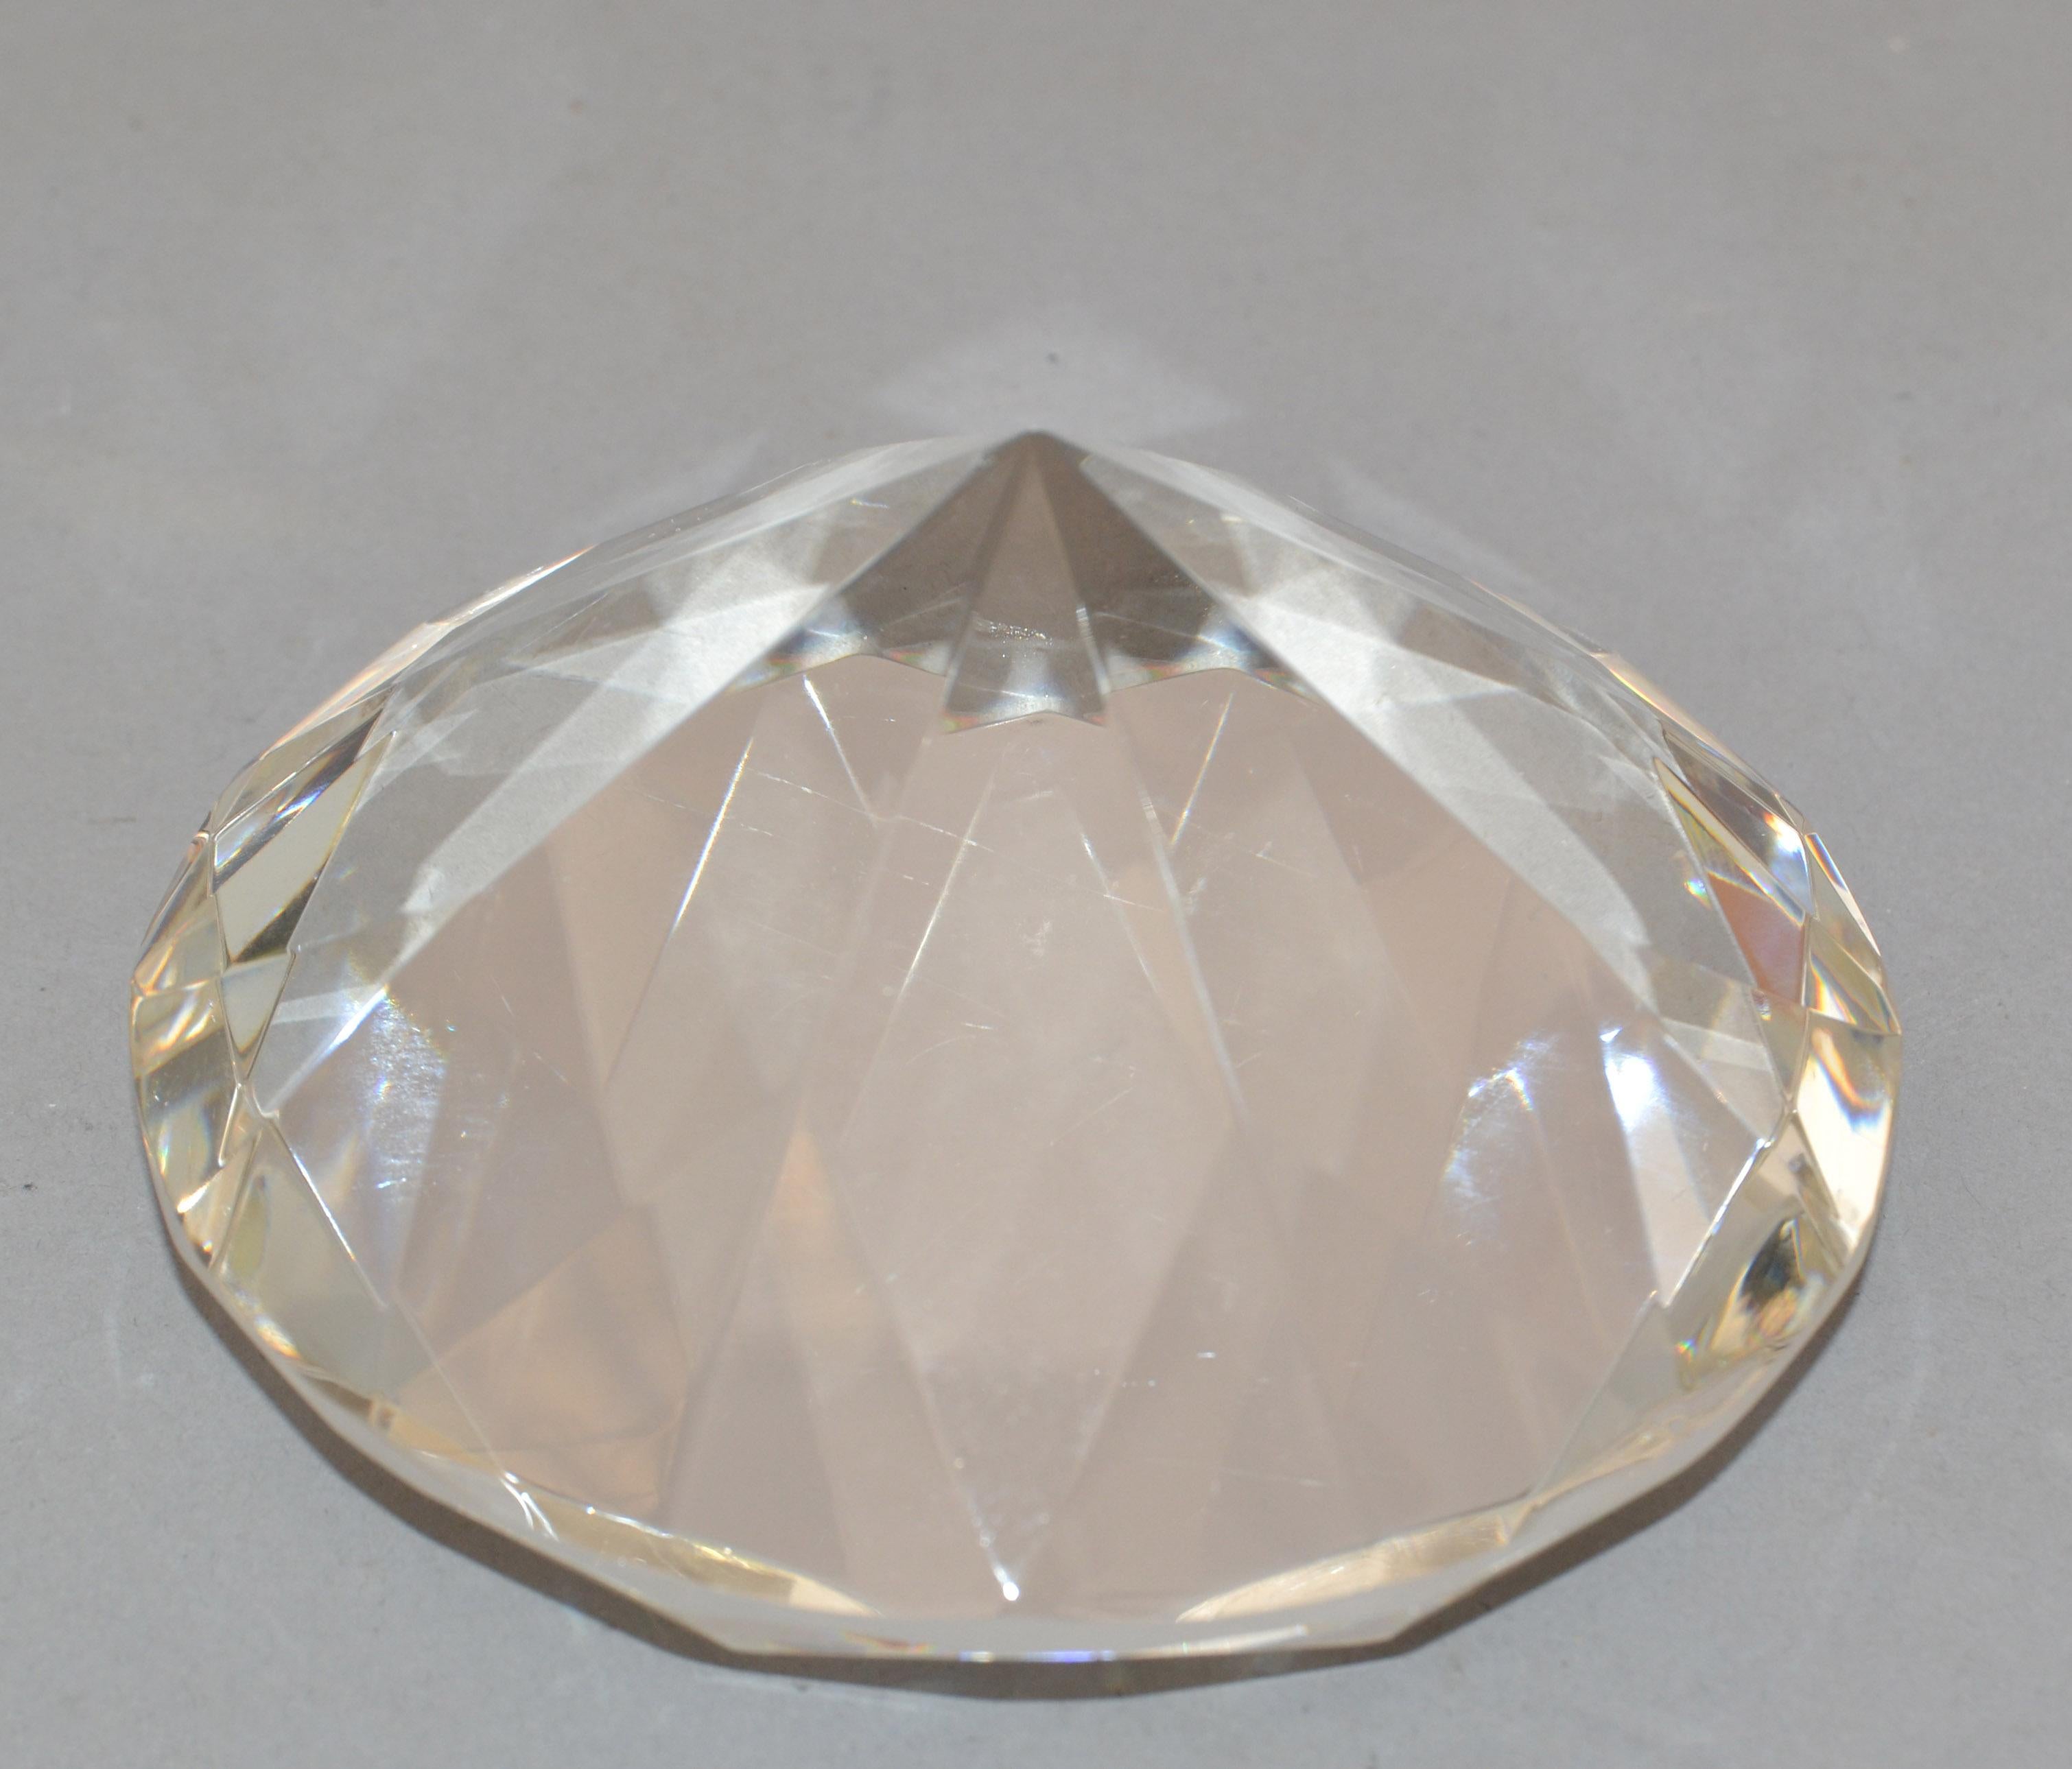 American One Mid-Century Modern Faceted Glass Diamond Shaped Figurine Paperweight Desk  For Sale